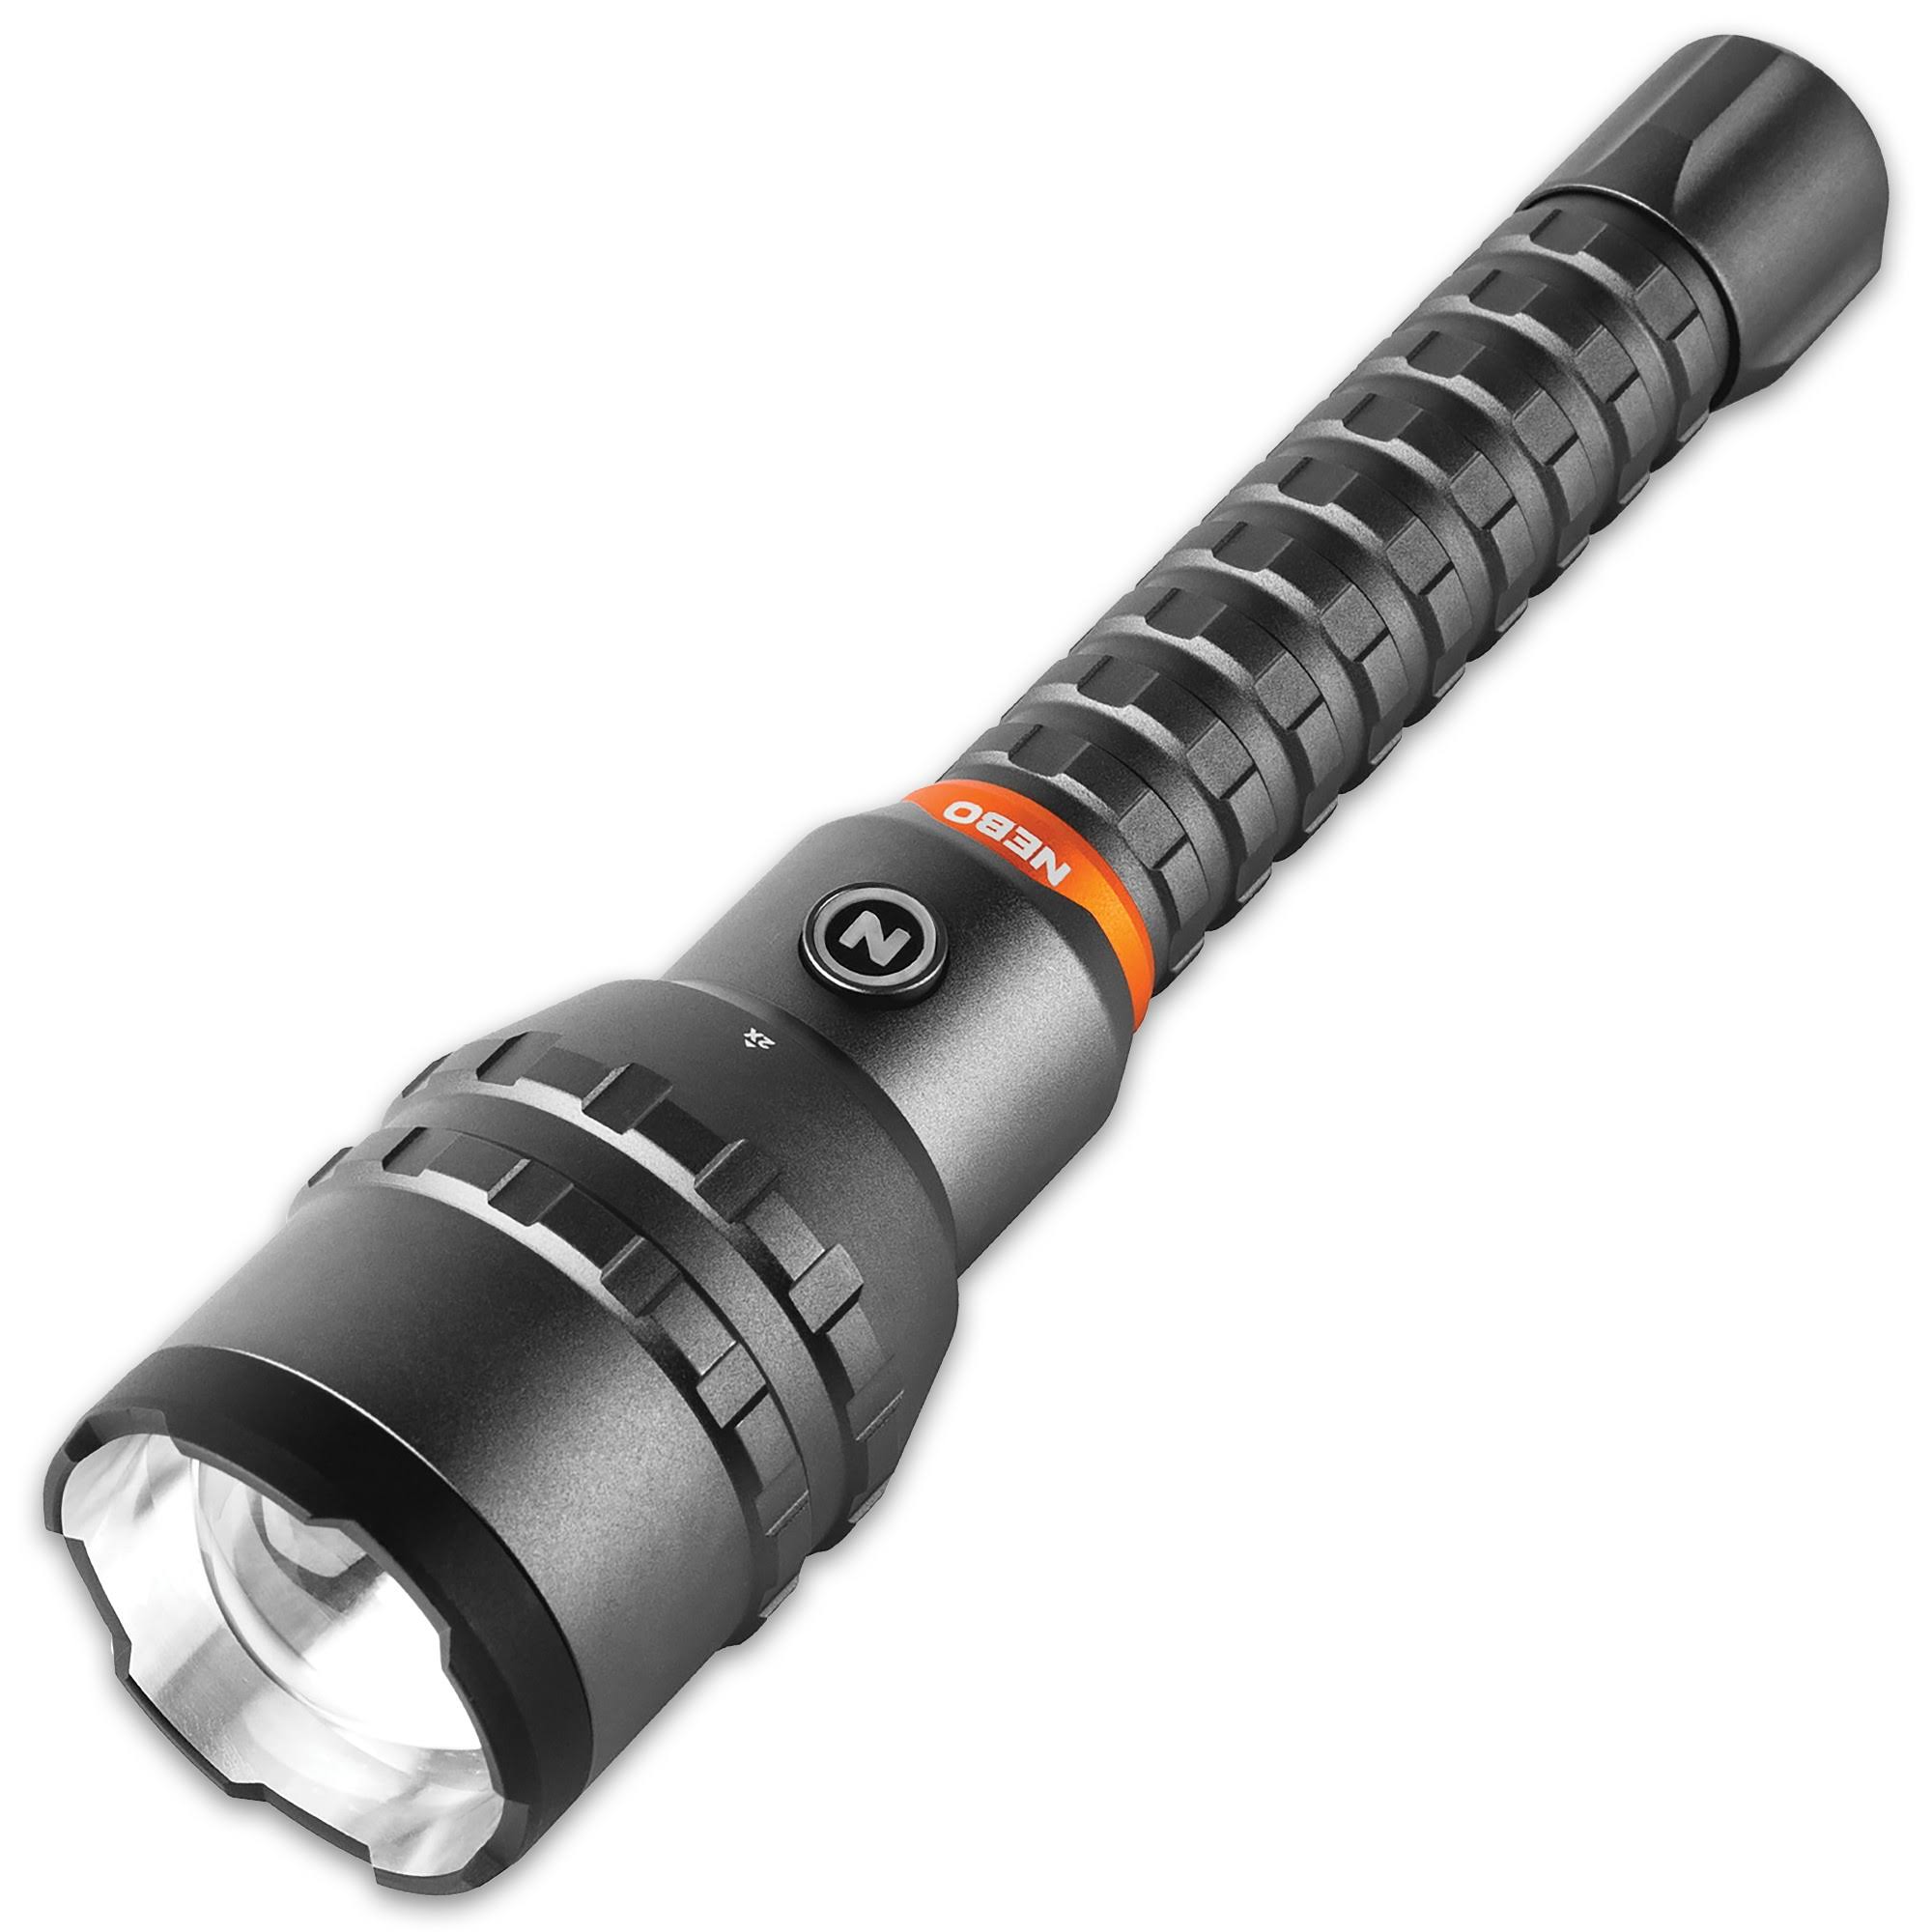 Nebo 12000, USB Rechargeable, 12,000 Lumen Flashlight With 2x Zoom, 5 Light Modes, Waterproof (IP67), and Power Bank, Bright Flashlight For EDC,